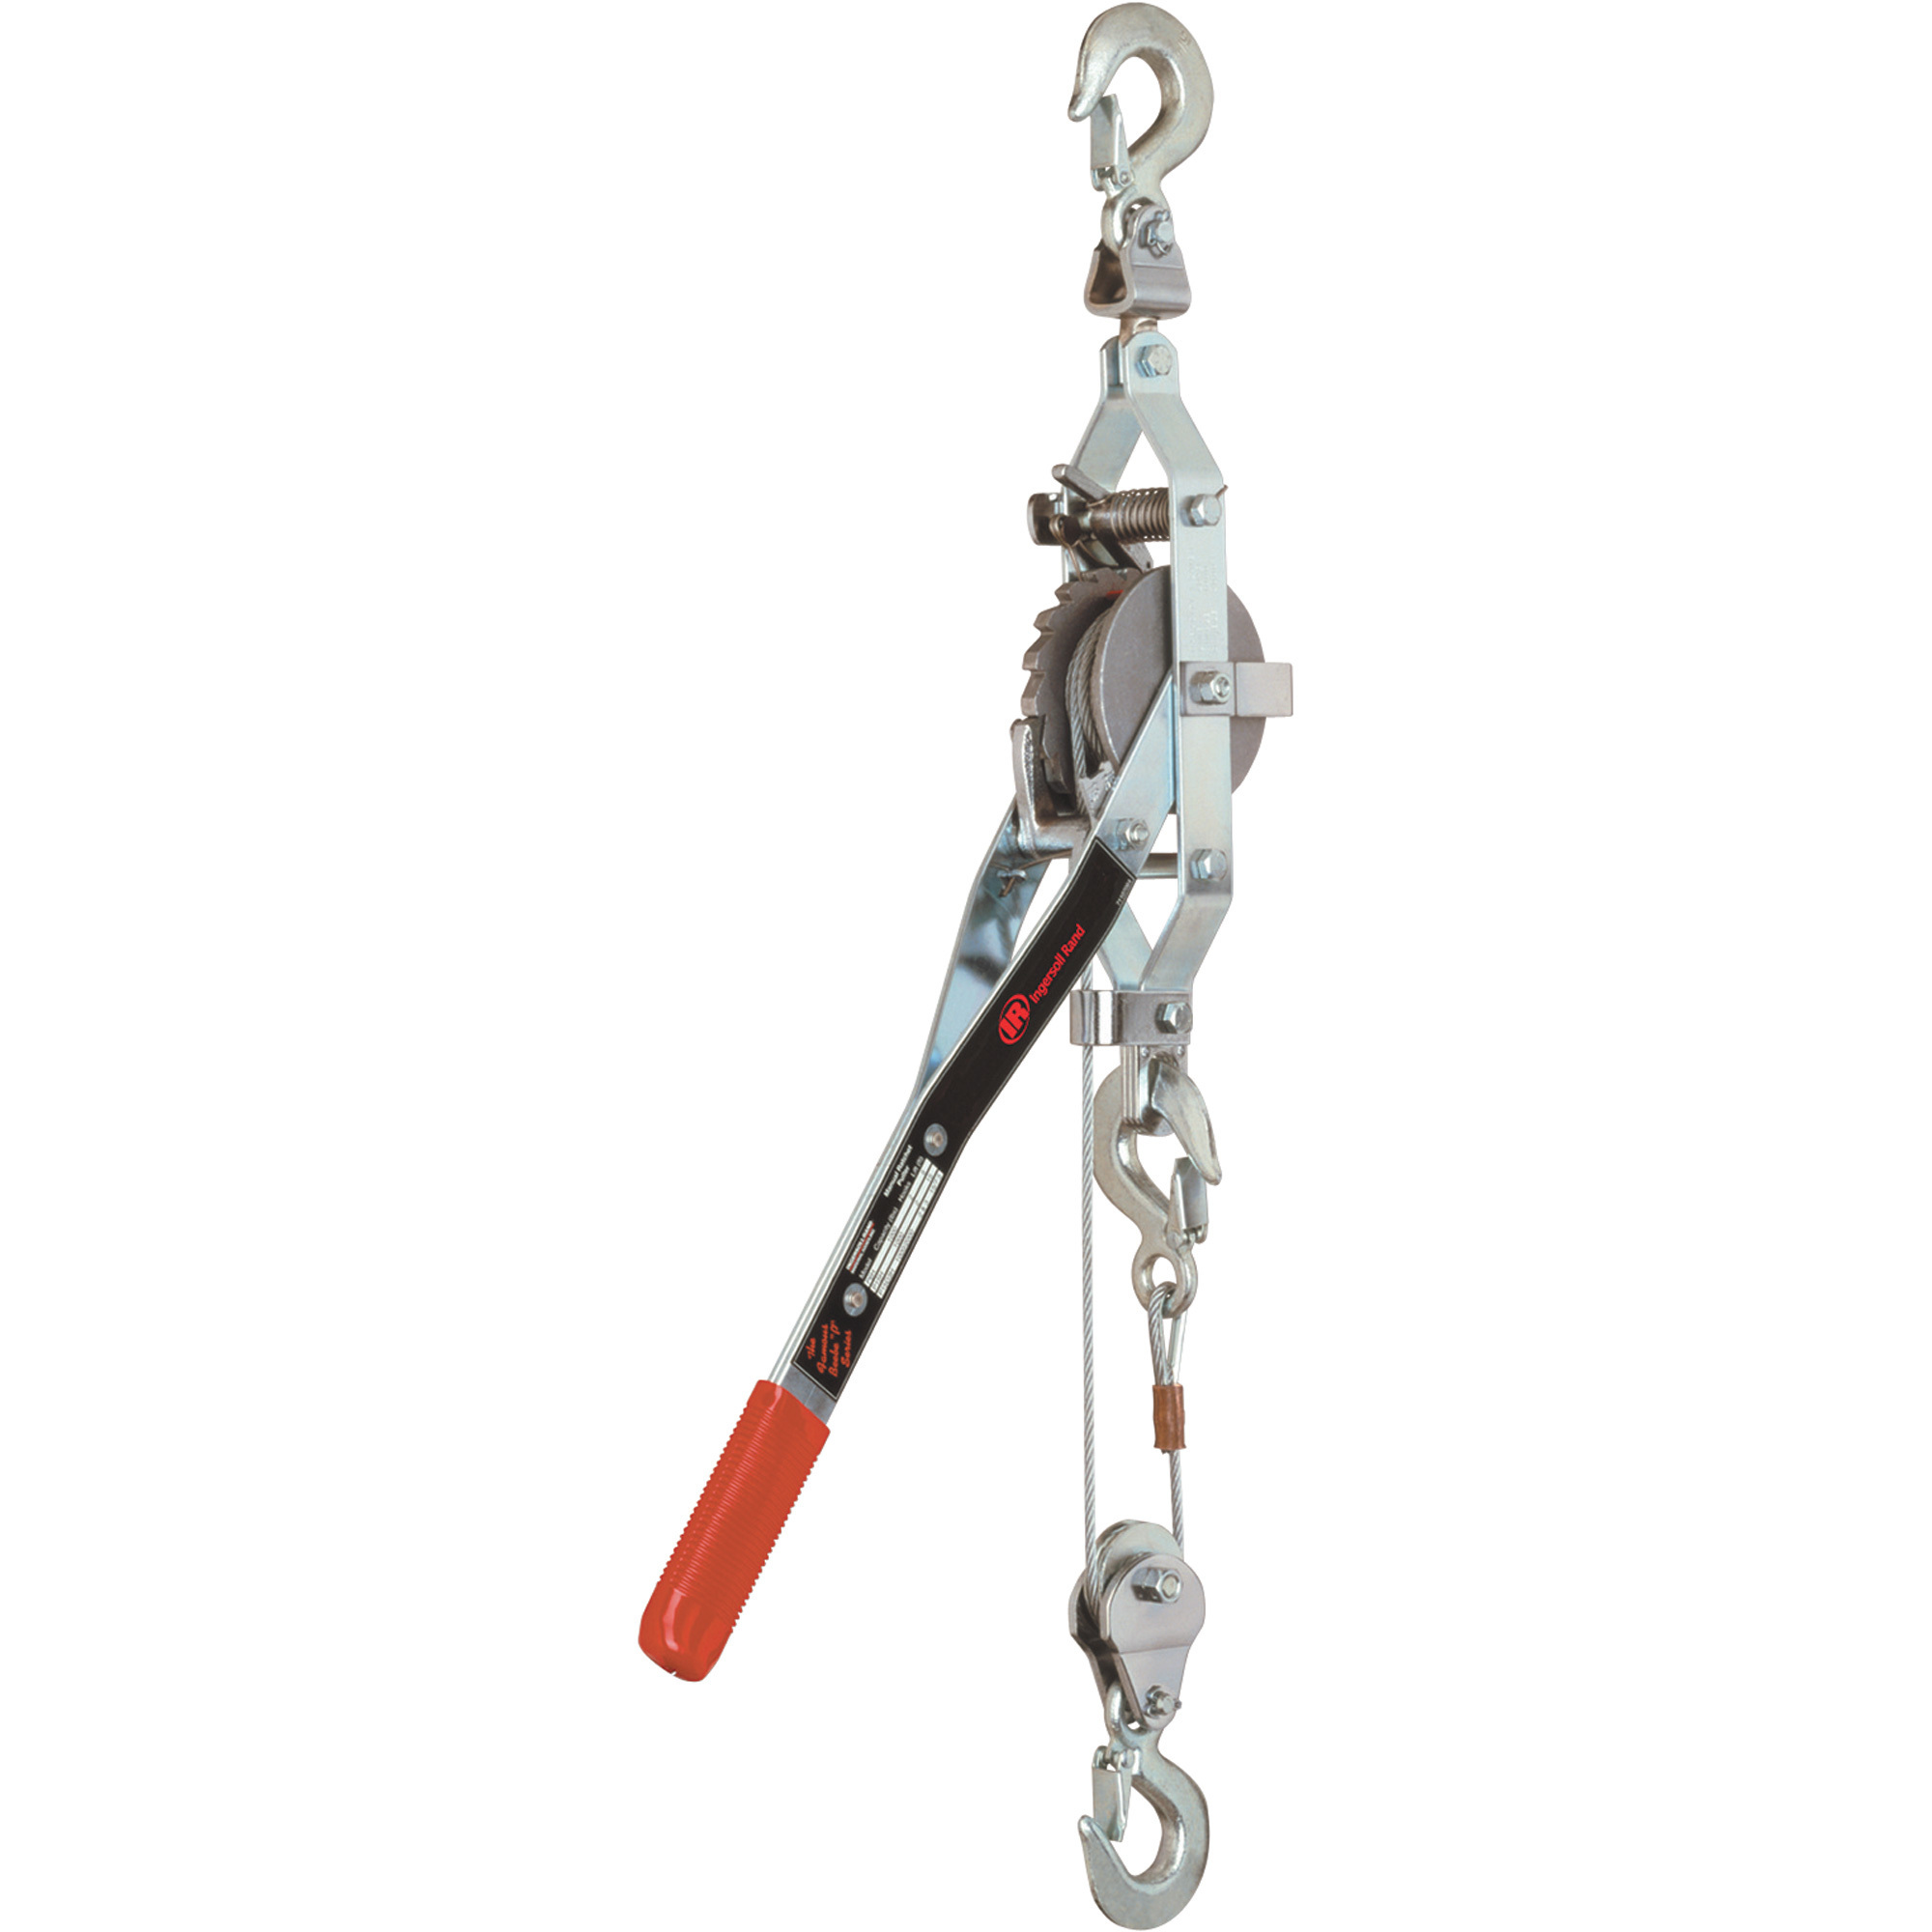 Ingersoll Rand Wire Rope Puller, 1,000-Lb. Capacity, 3/16Inch Load Chain Diameter, Model P15H